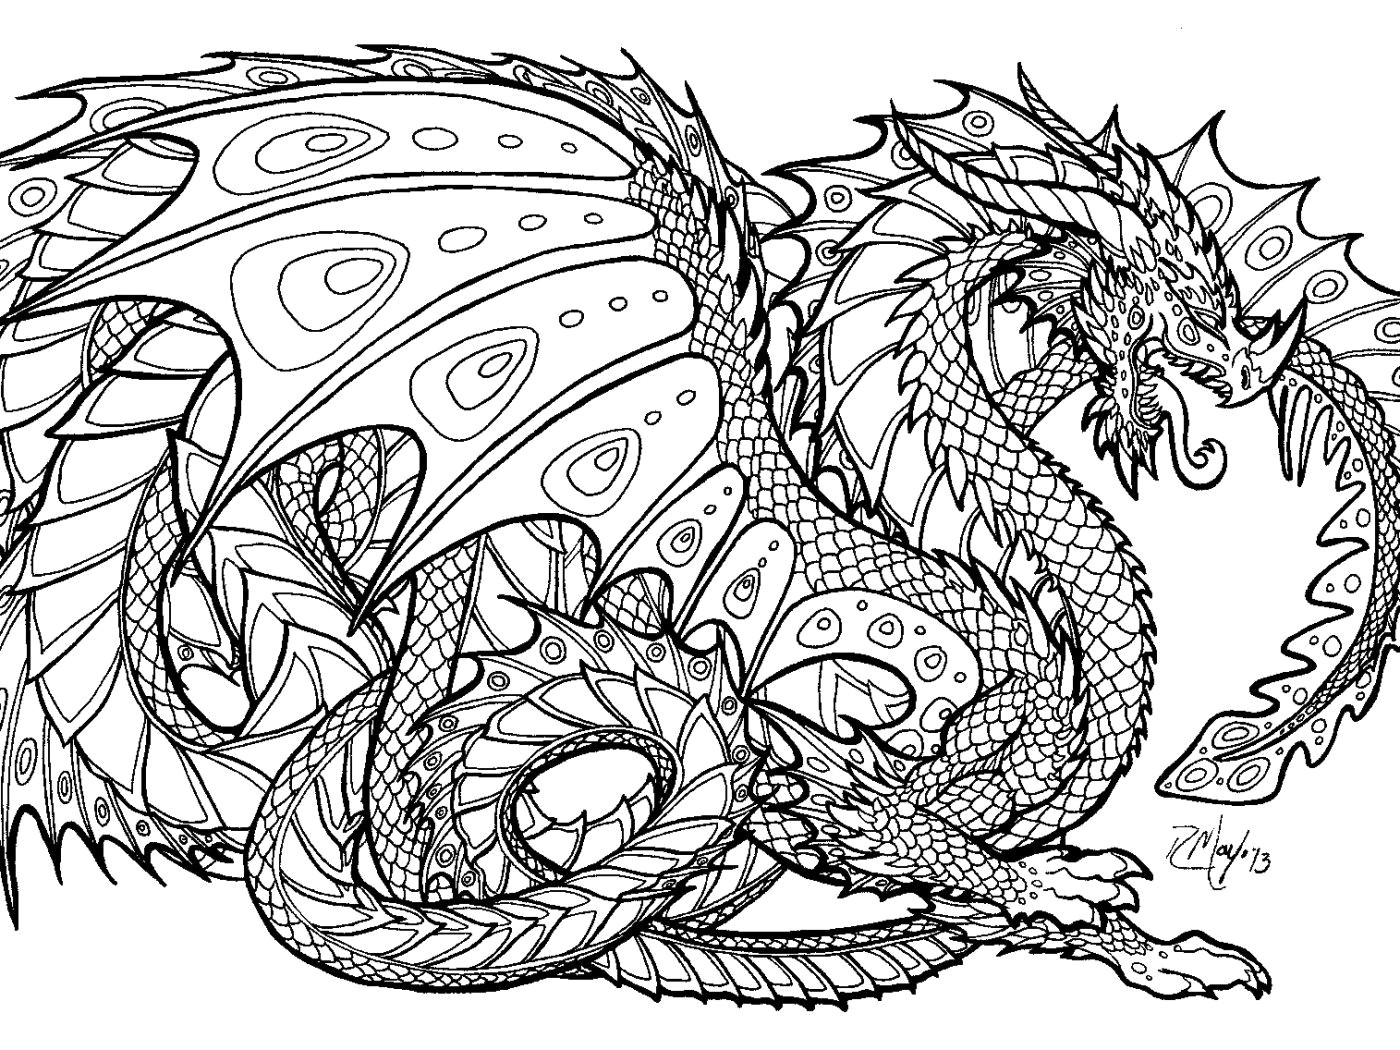 Coloring Pages Of Animals Hard Animal Coloring Pages Hard 9 Sxroqz Free Page Telematik Institut